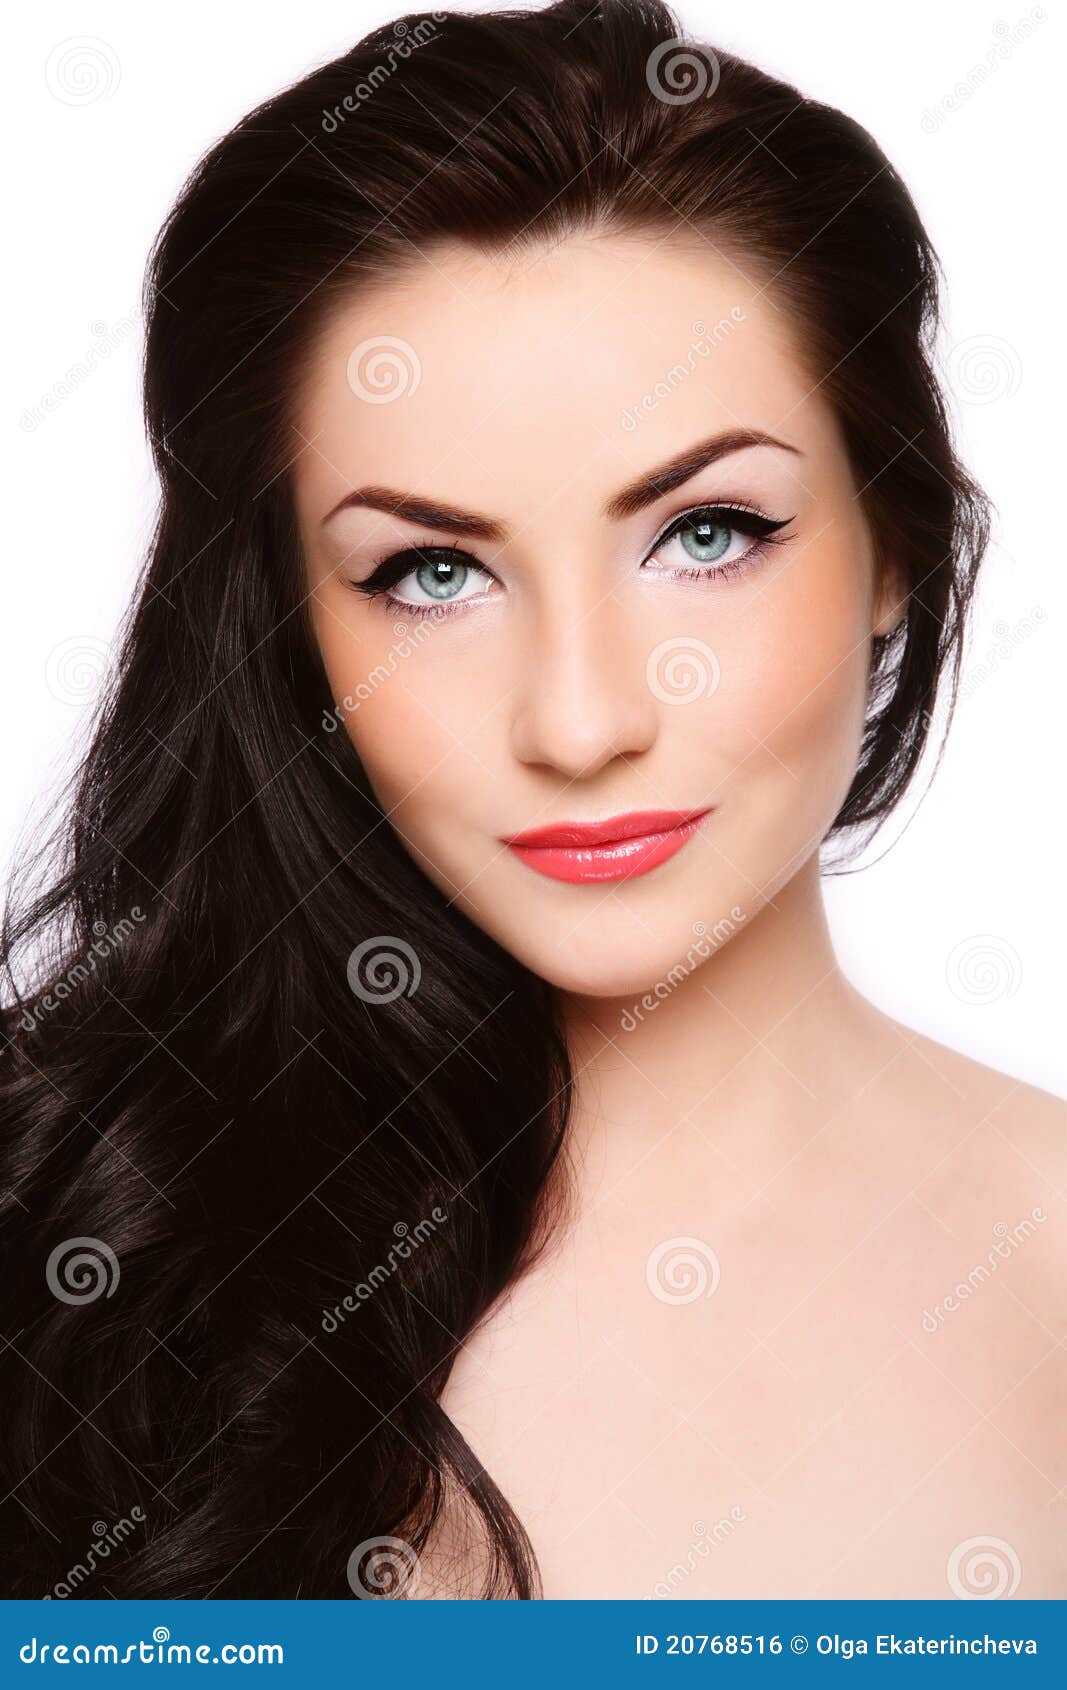 Clear skin stock photo. Image of glamour, fresh, sensual - 20768516